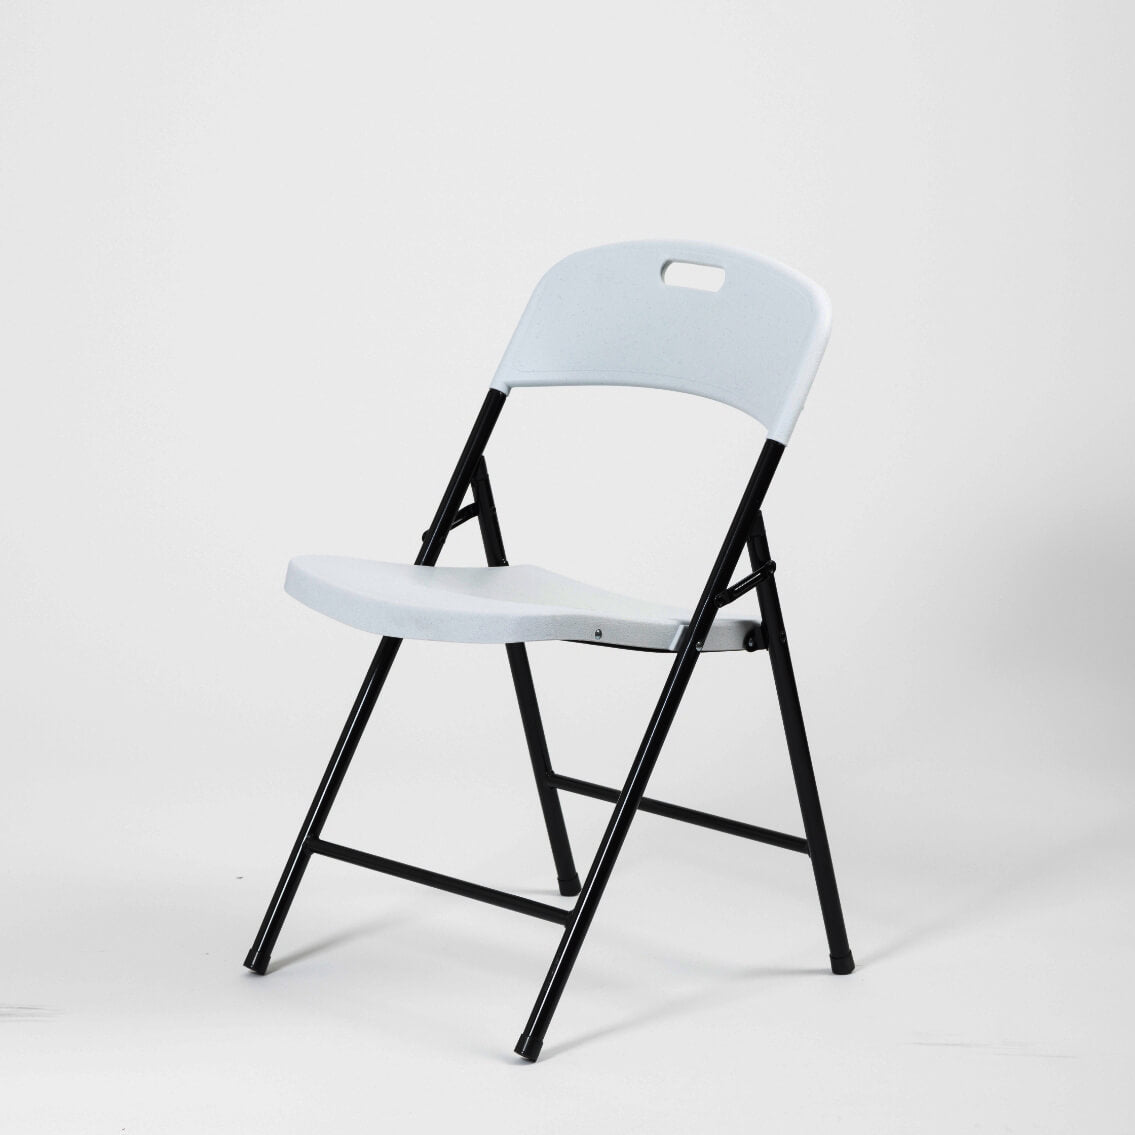 Lifetime Folding Tables & Folding Chairs 